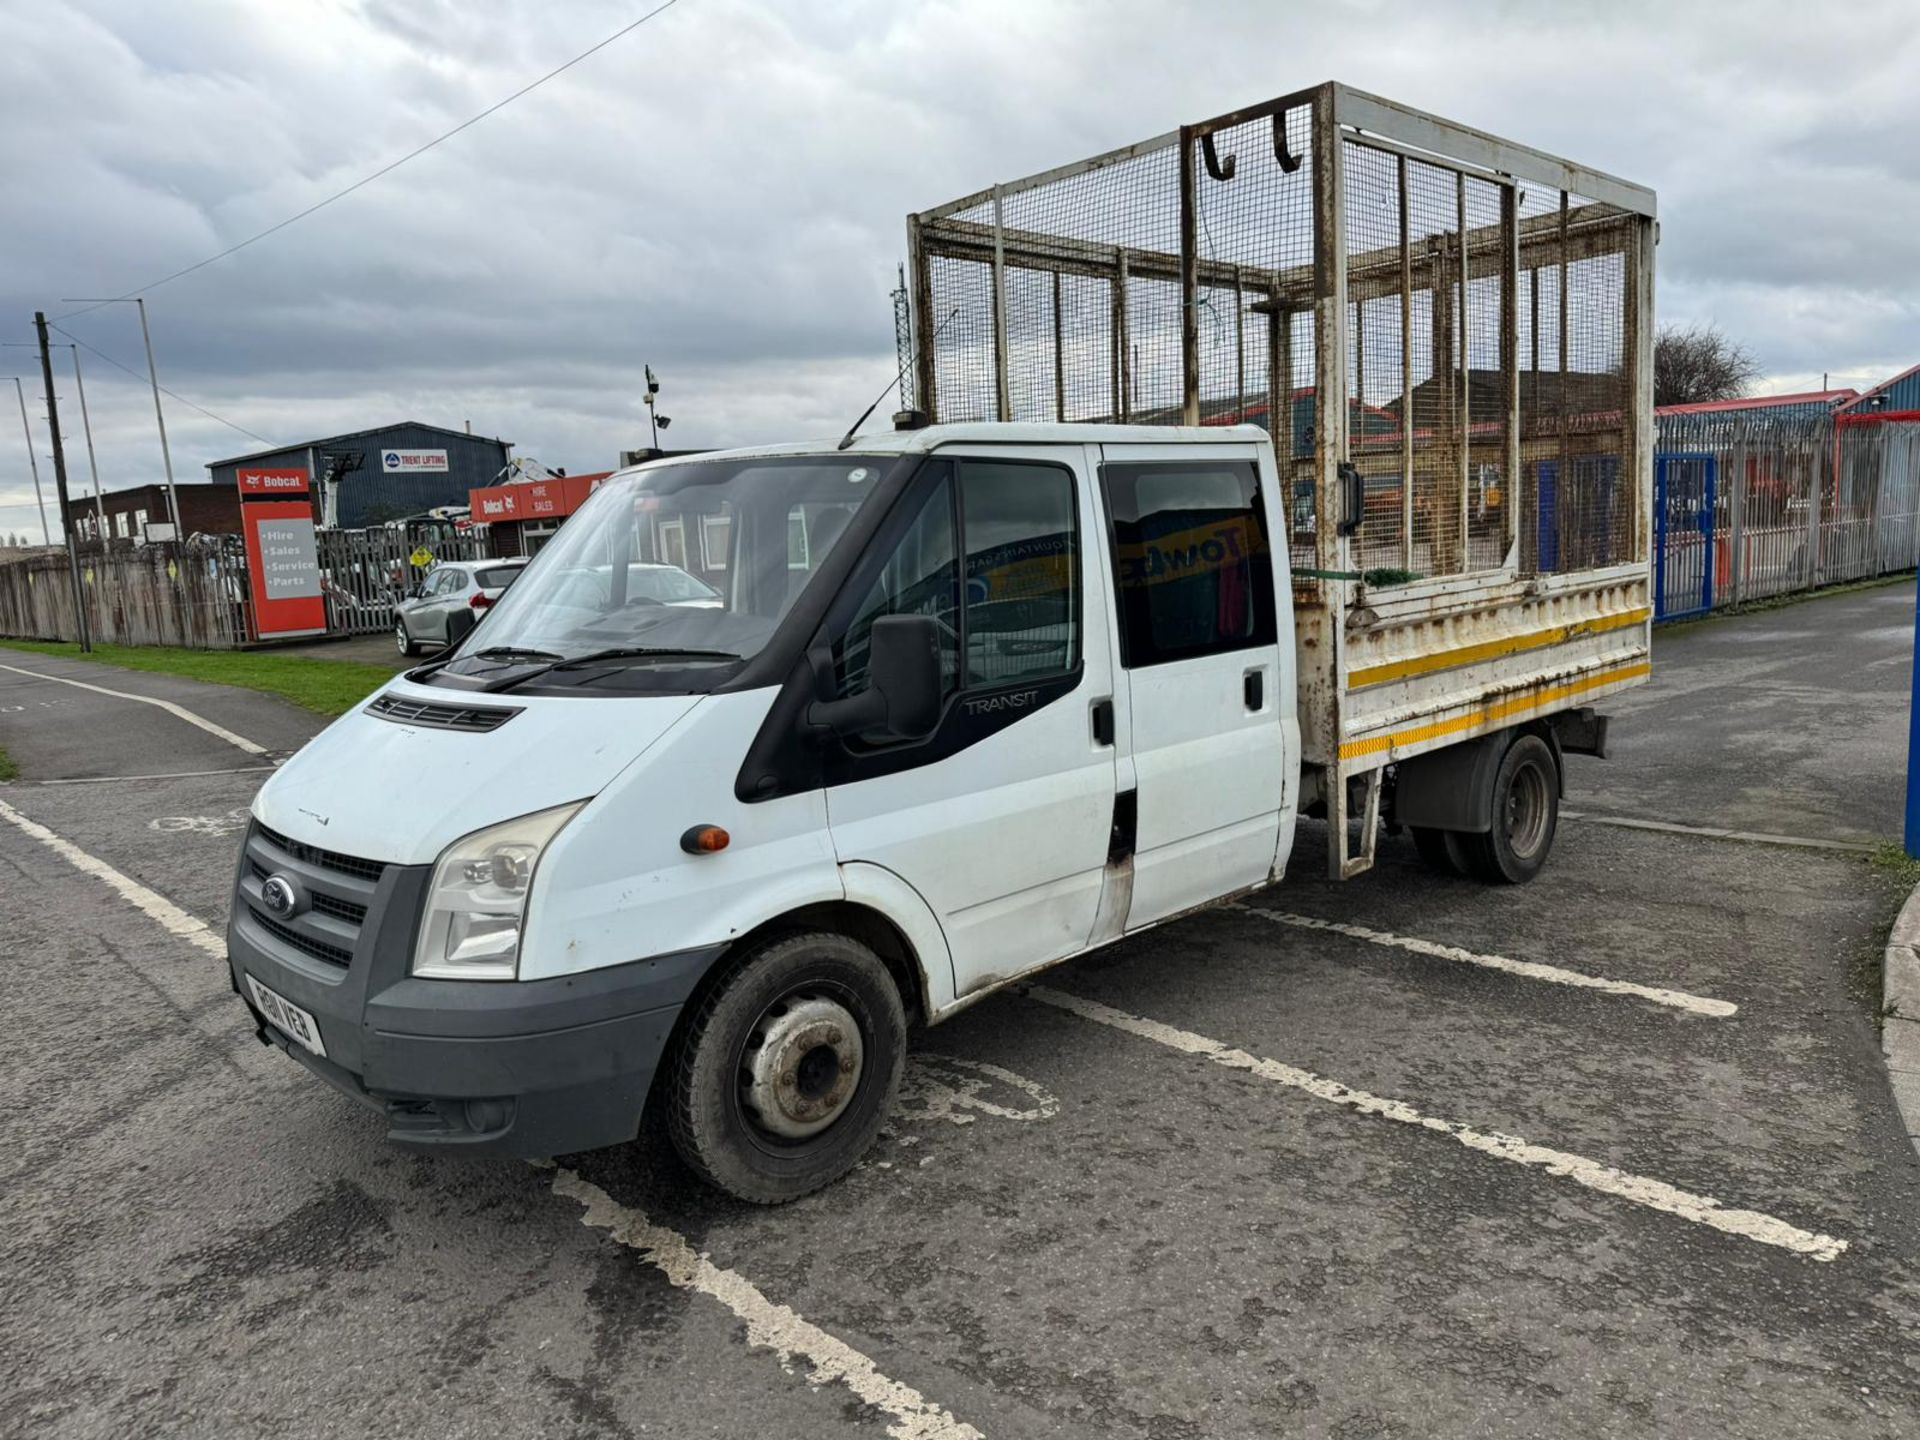 2011 11 FORD TRANSIT CREW CAB CAGED TIPPER - 204K MILES